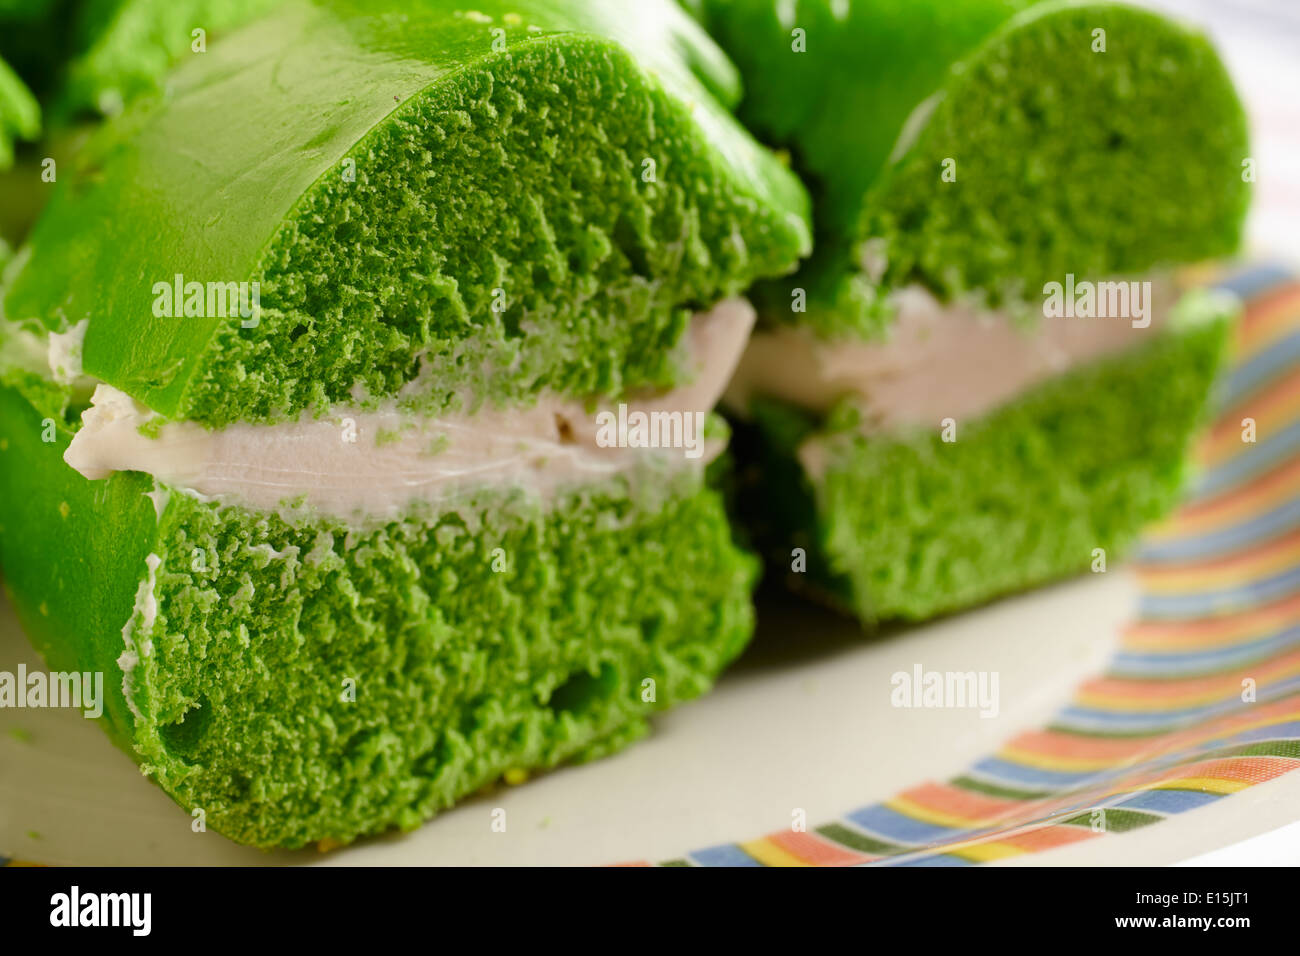 Green bagel with cream cheese, a New York City St. Patrick's Day tradition Stock Photo